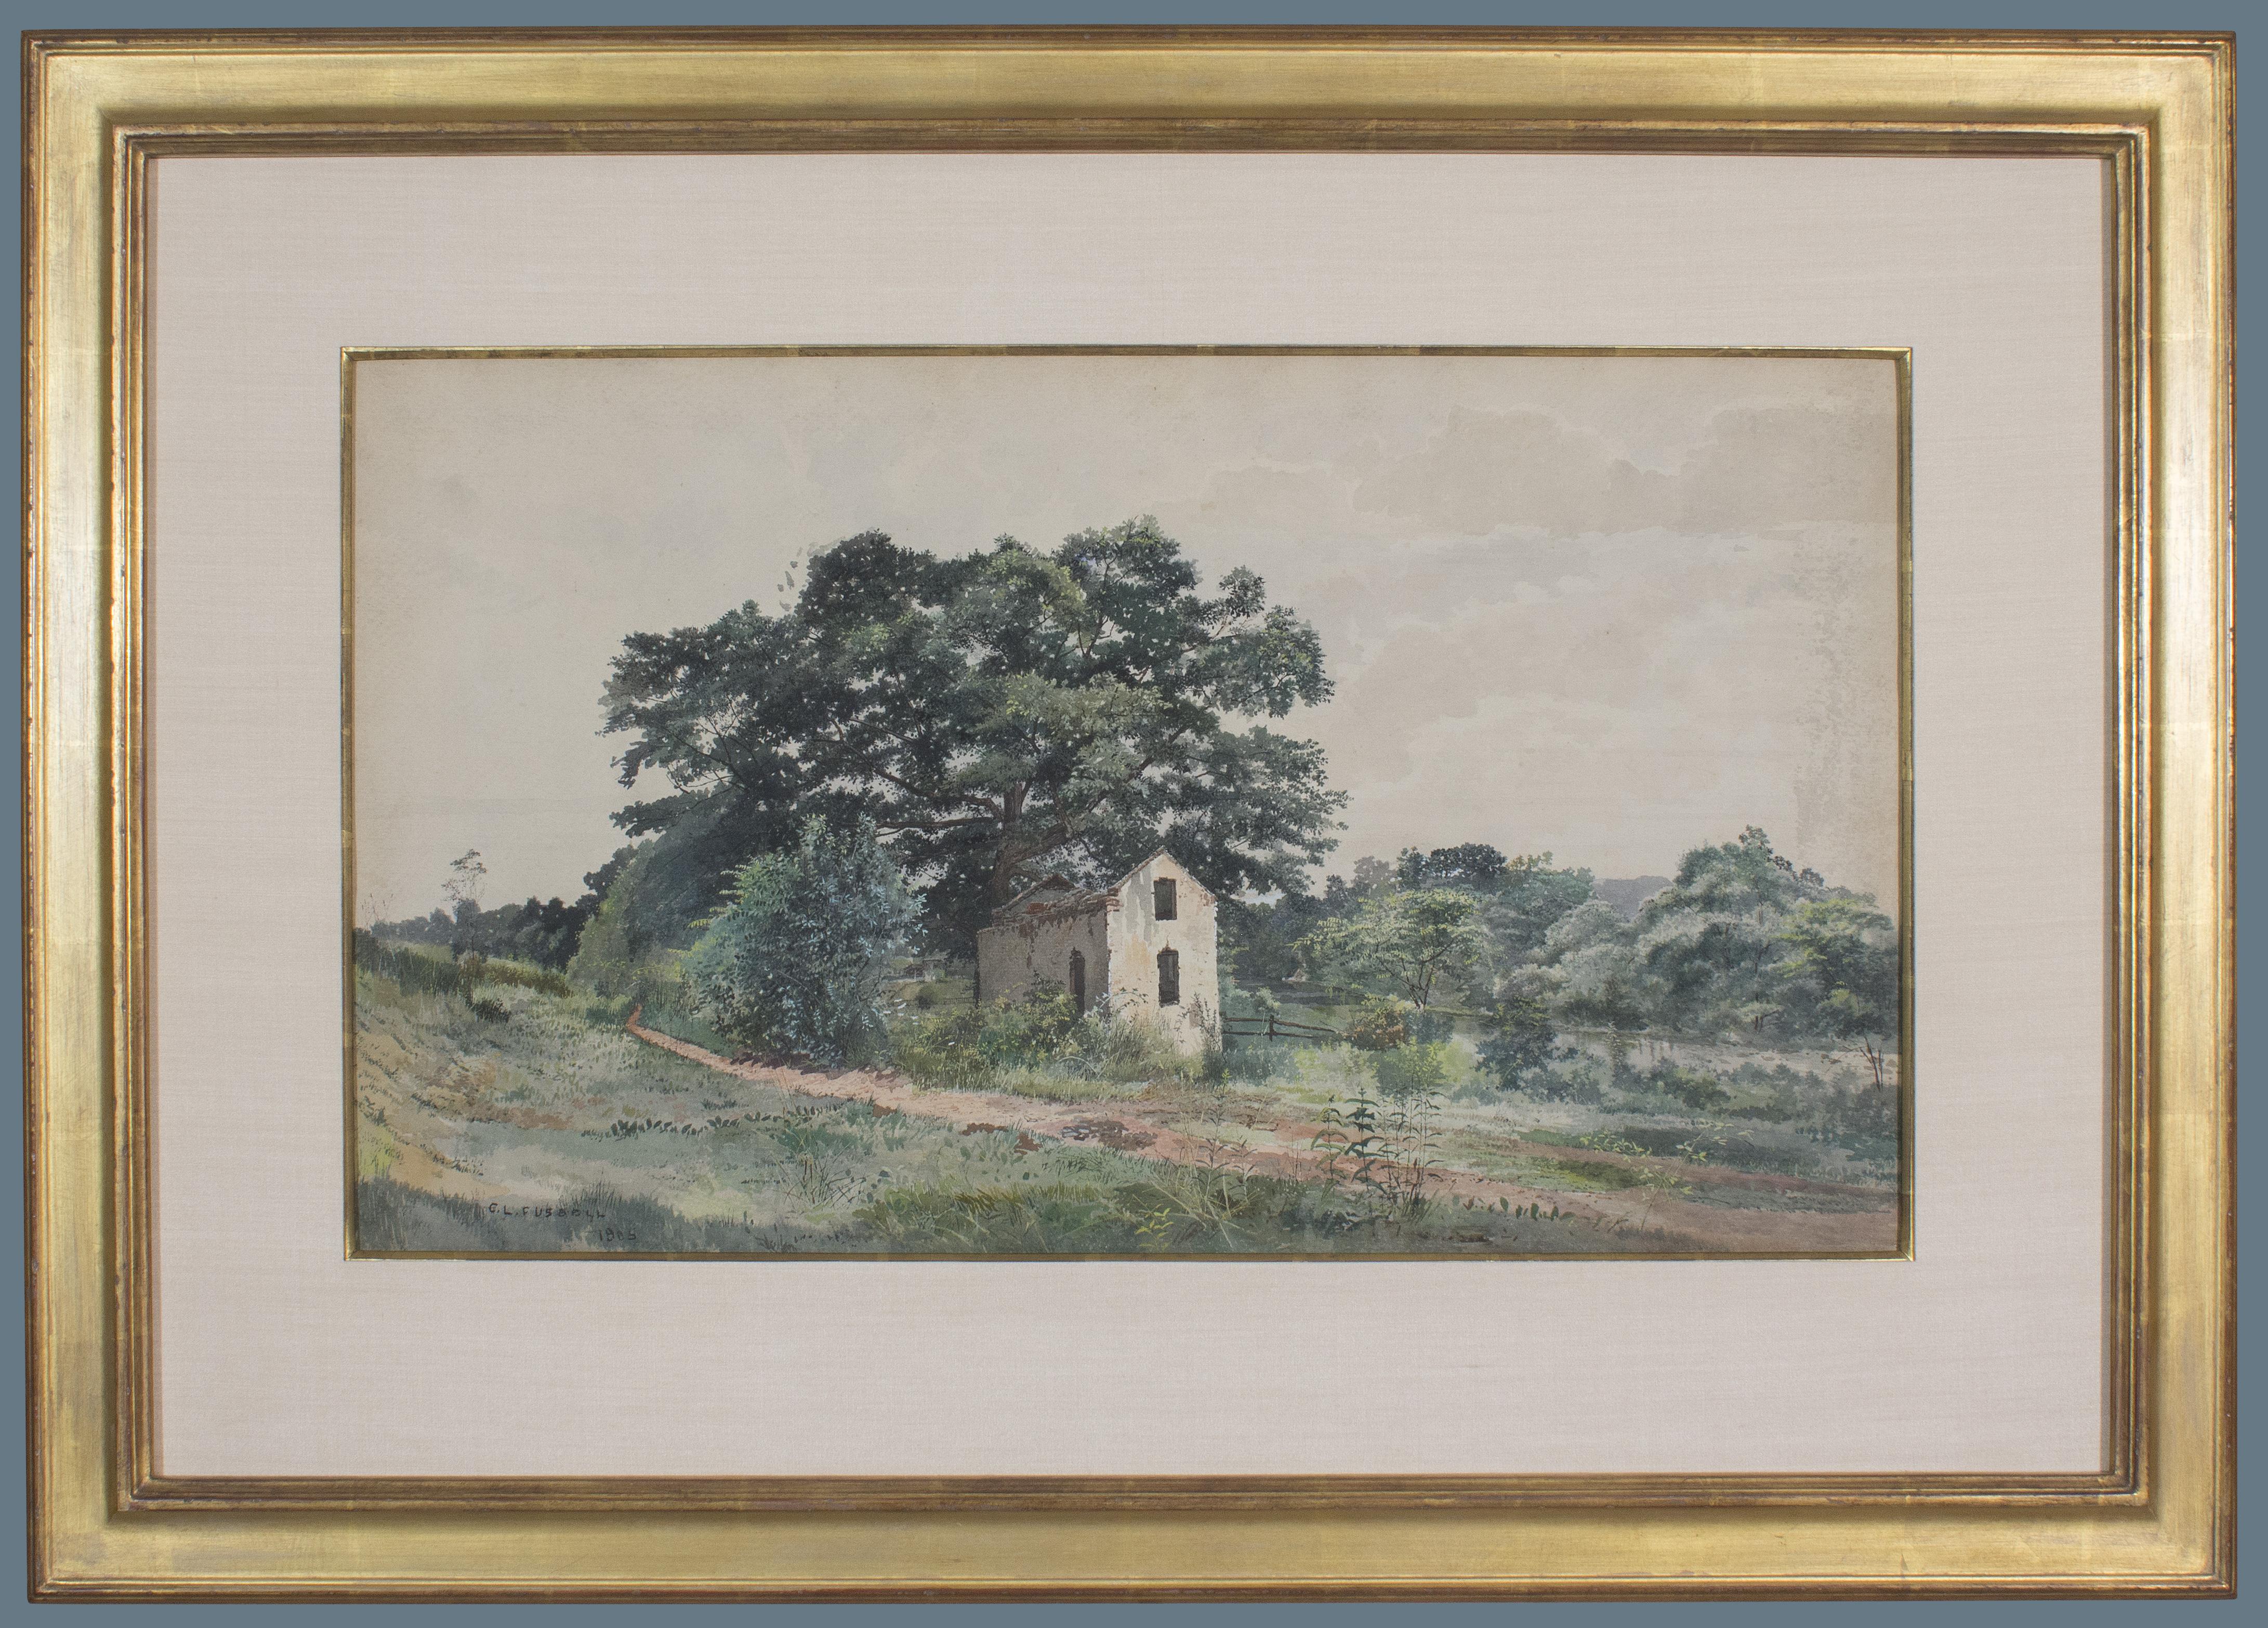 Charles Lewis Fussell Landscape Art – Abandoned House on Country Road – Delaware County, PA